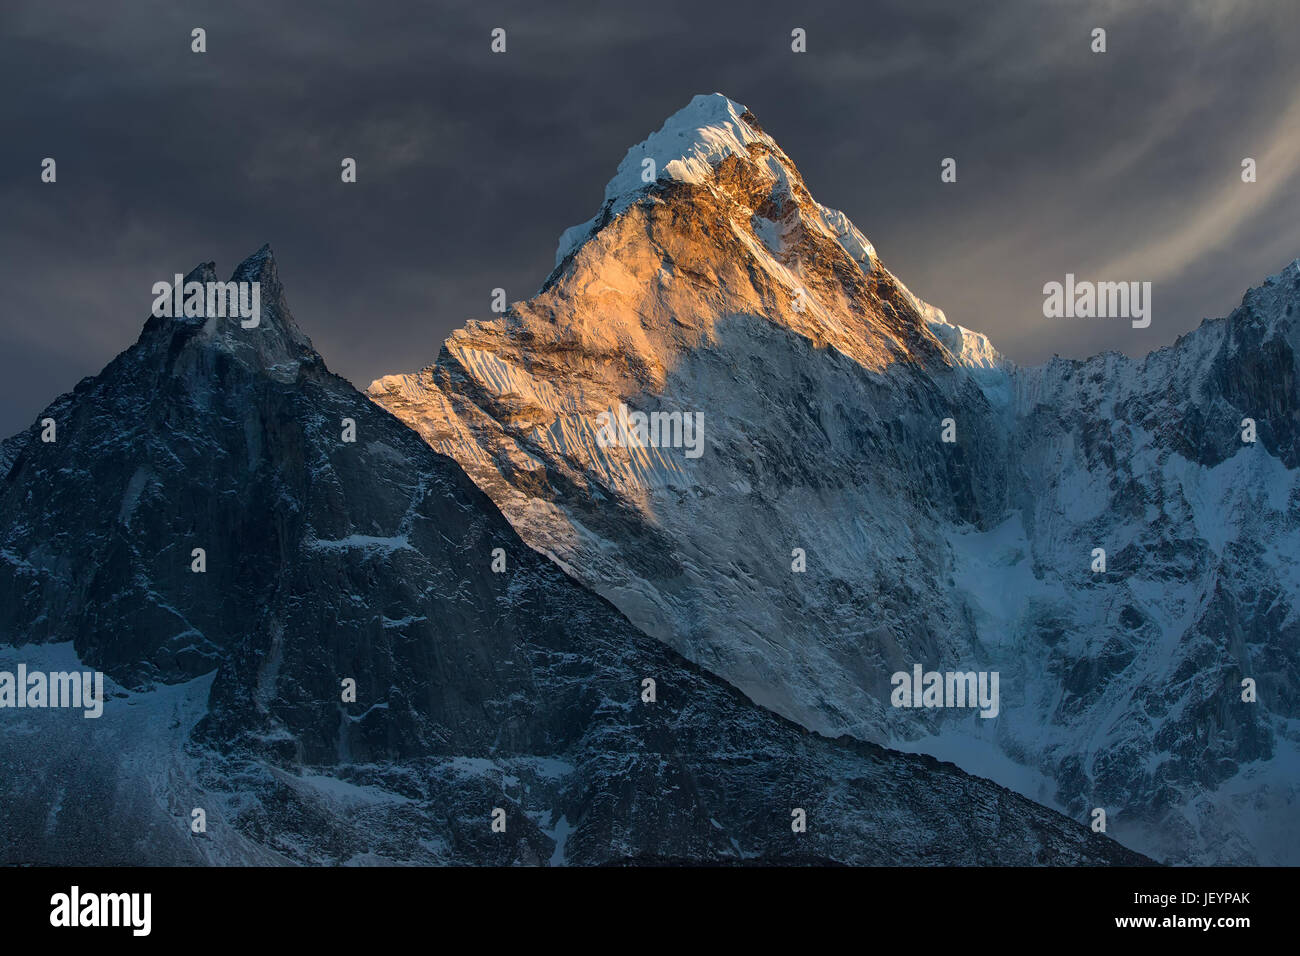 Majestic snowy mountain peak - Ama Dablam (6,812 m) - one of the most beautiful and impressive peaks of our planet. Stock Photo